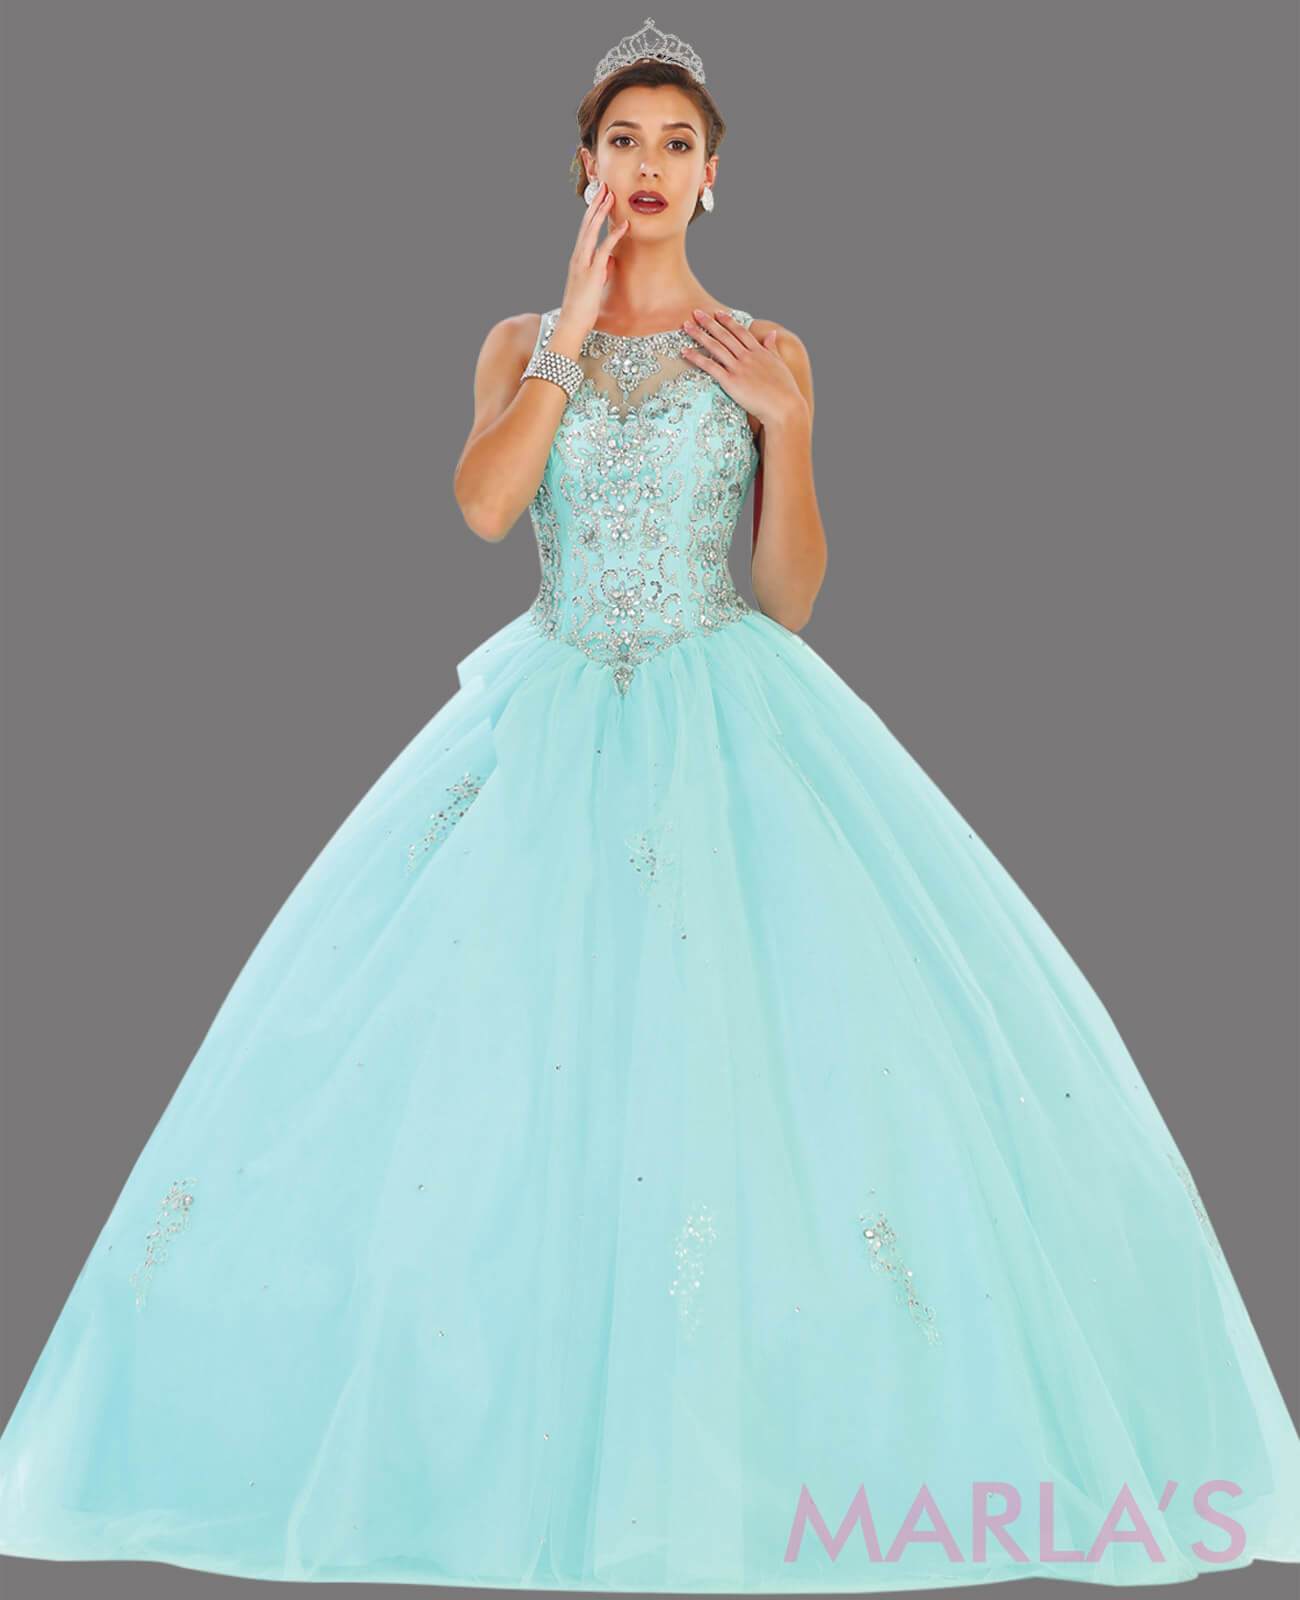 76.13L-Long aqua princess ball gown with gold lace trim and shrug Perfect for Engagement dress, Quinceanera, Sweet 16, Swet 15 and light blue Wedding Reception Dress. Available in plus sizes